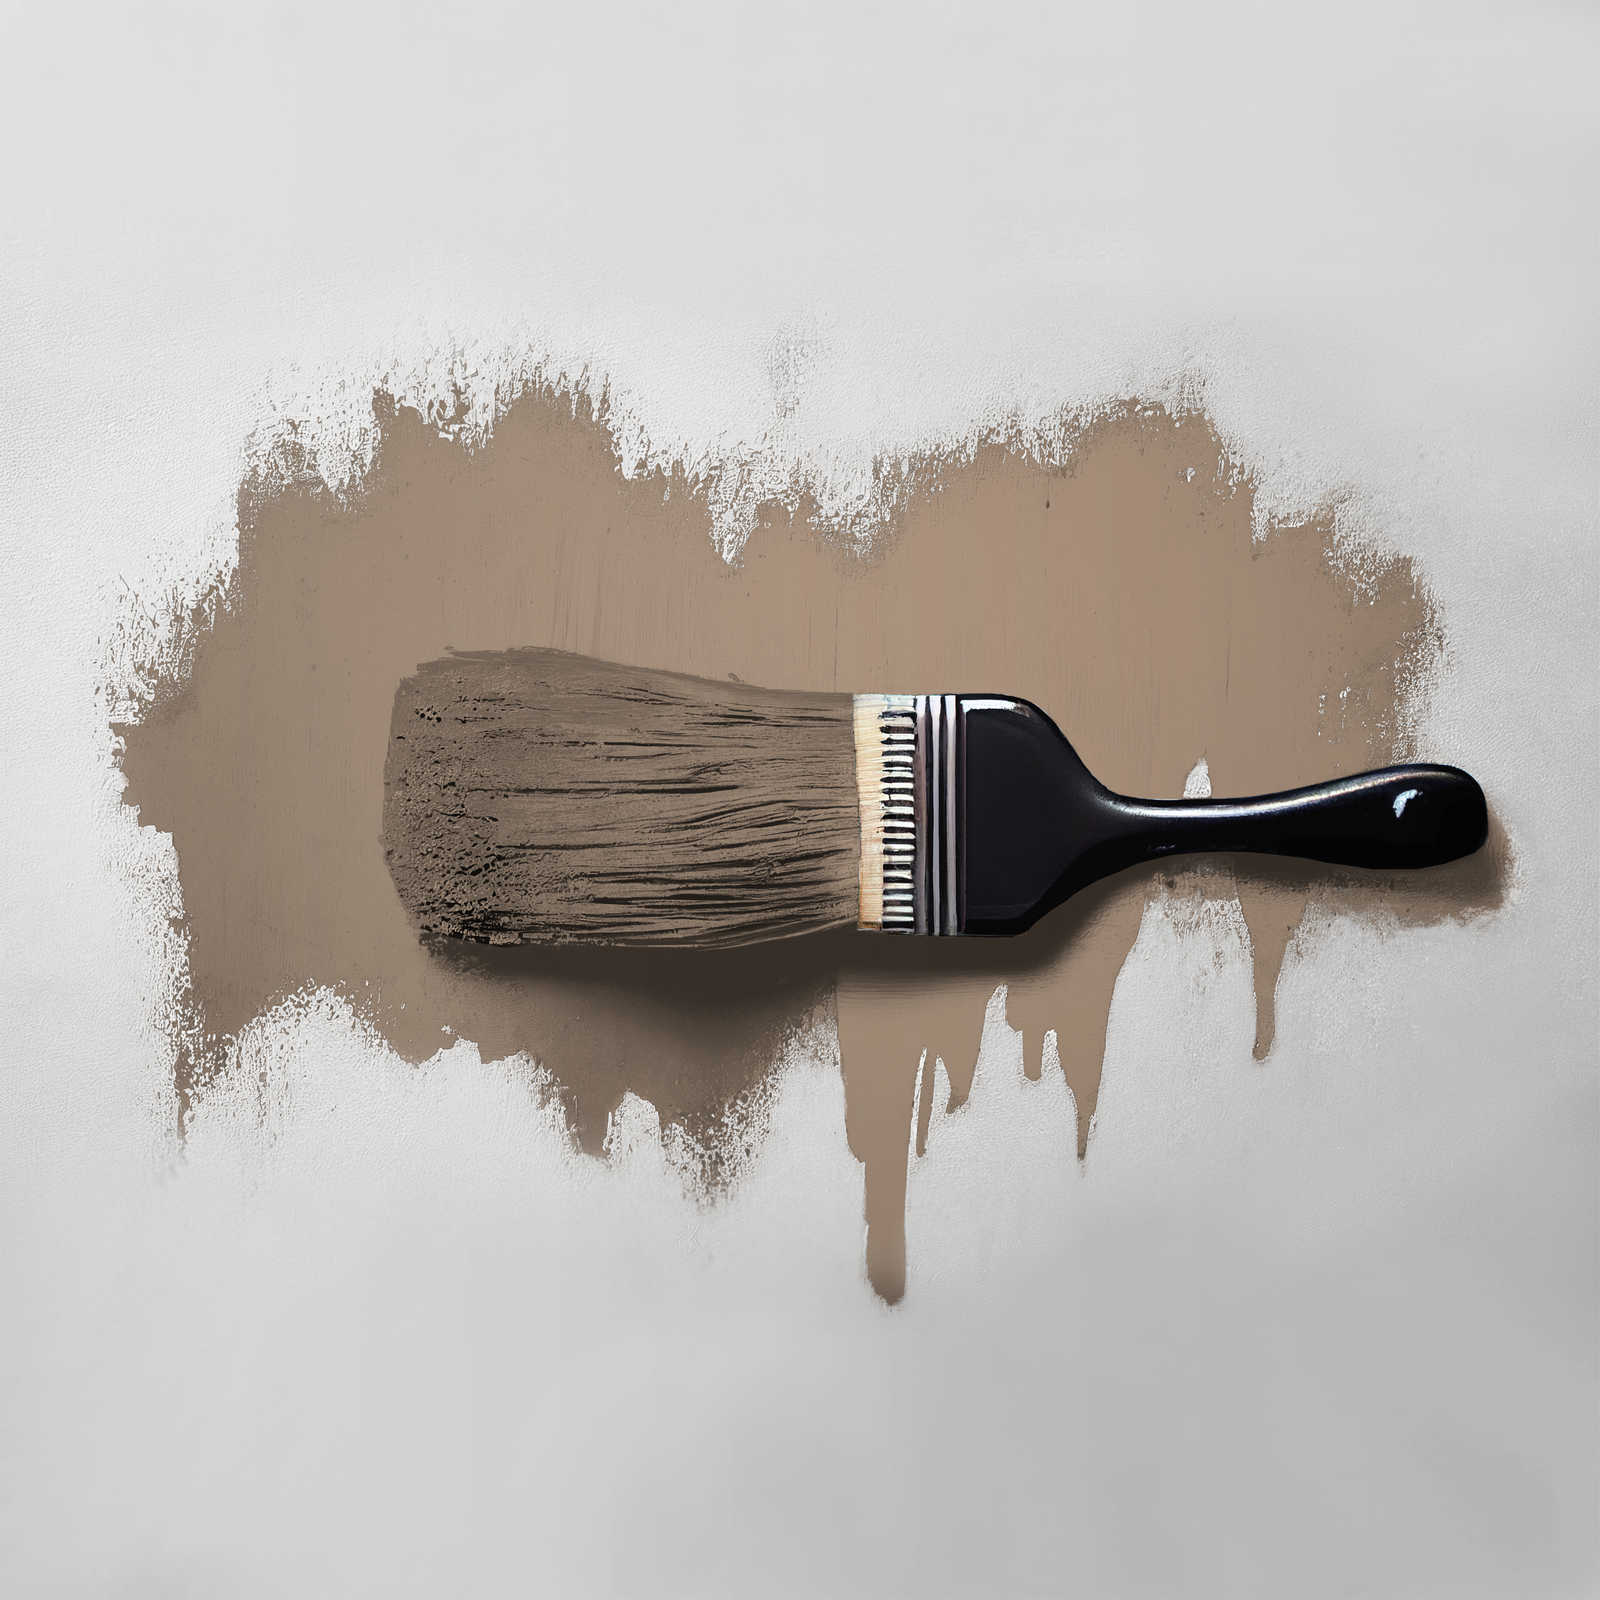             Wall Paint TCK6012 »Dynamic Date« in homely taupe – 2.5 litre
        